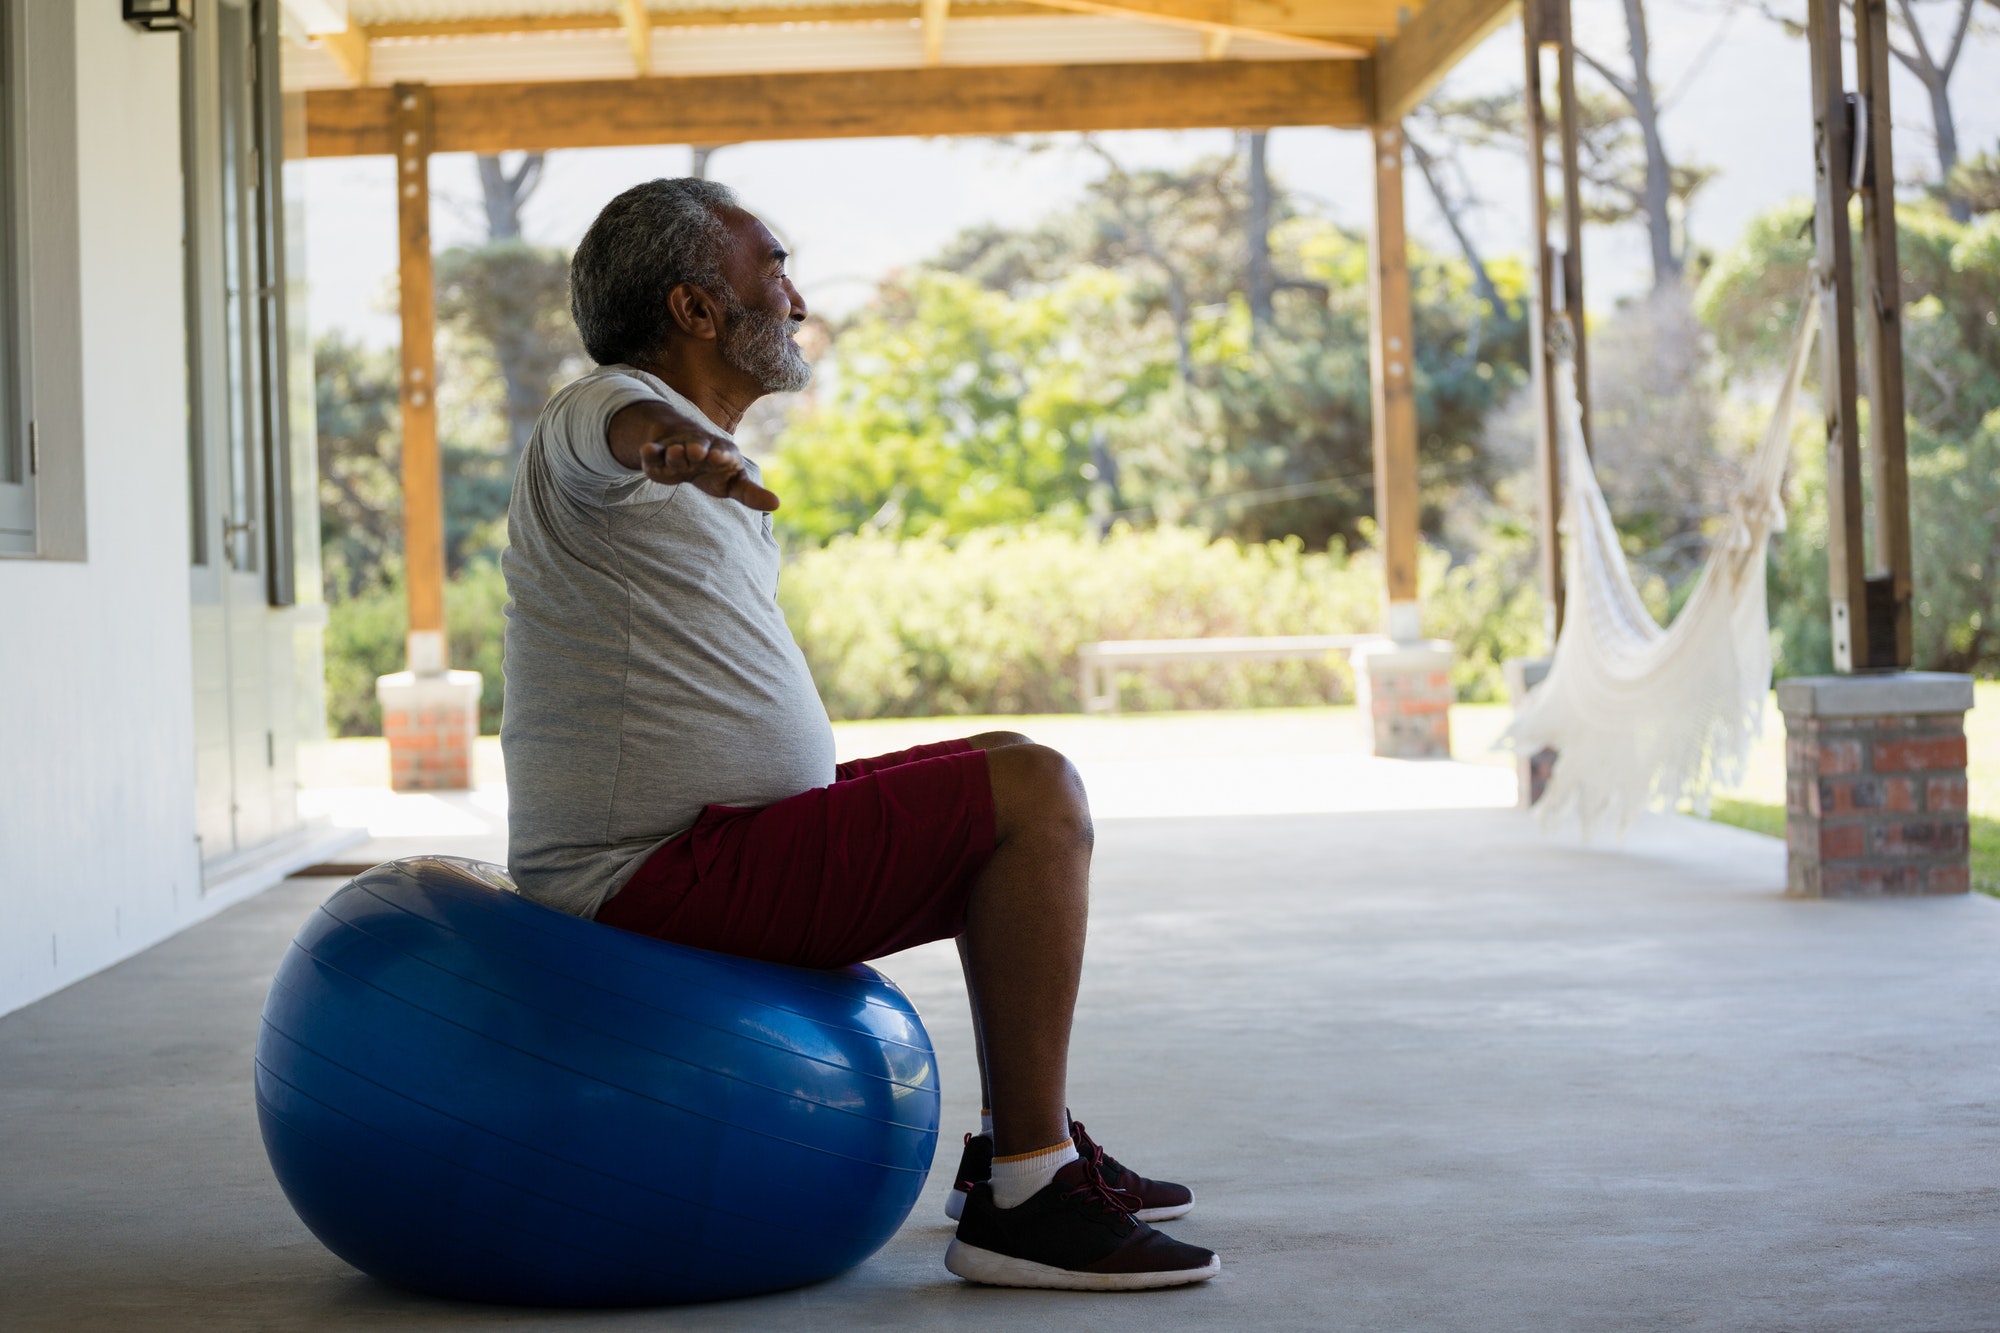 Senior man exercising on exercise ball in the porch